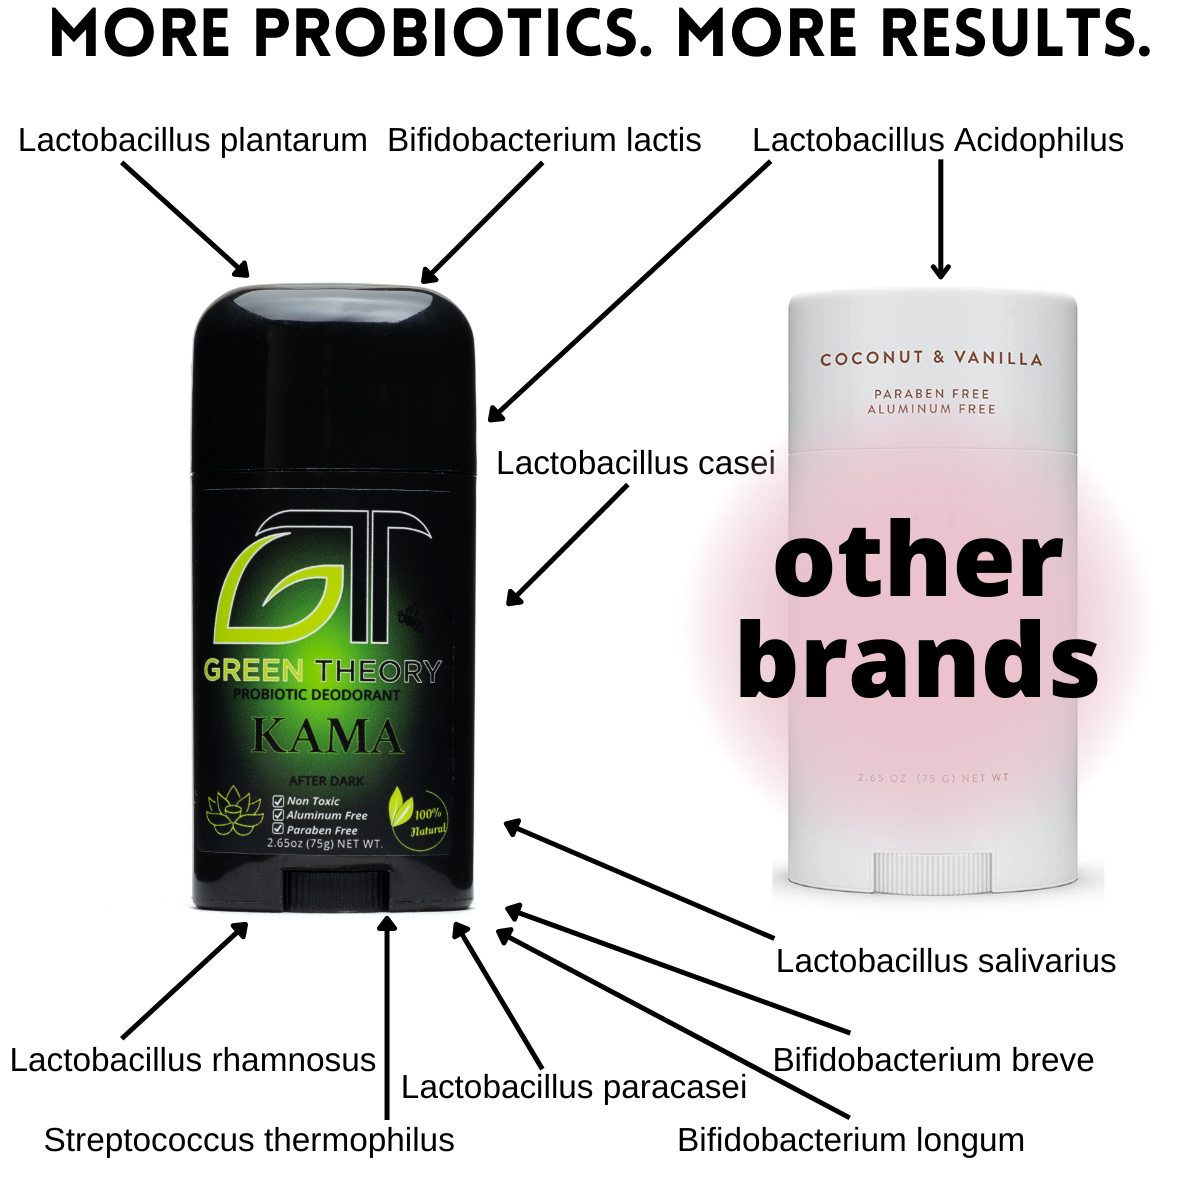 graphic depicting green theory kama aluminum free deodorant compared to competition showing 10 strains of probiotics in green theory and one strain in competitor